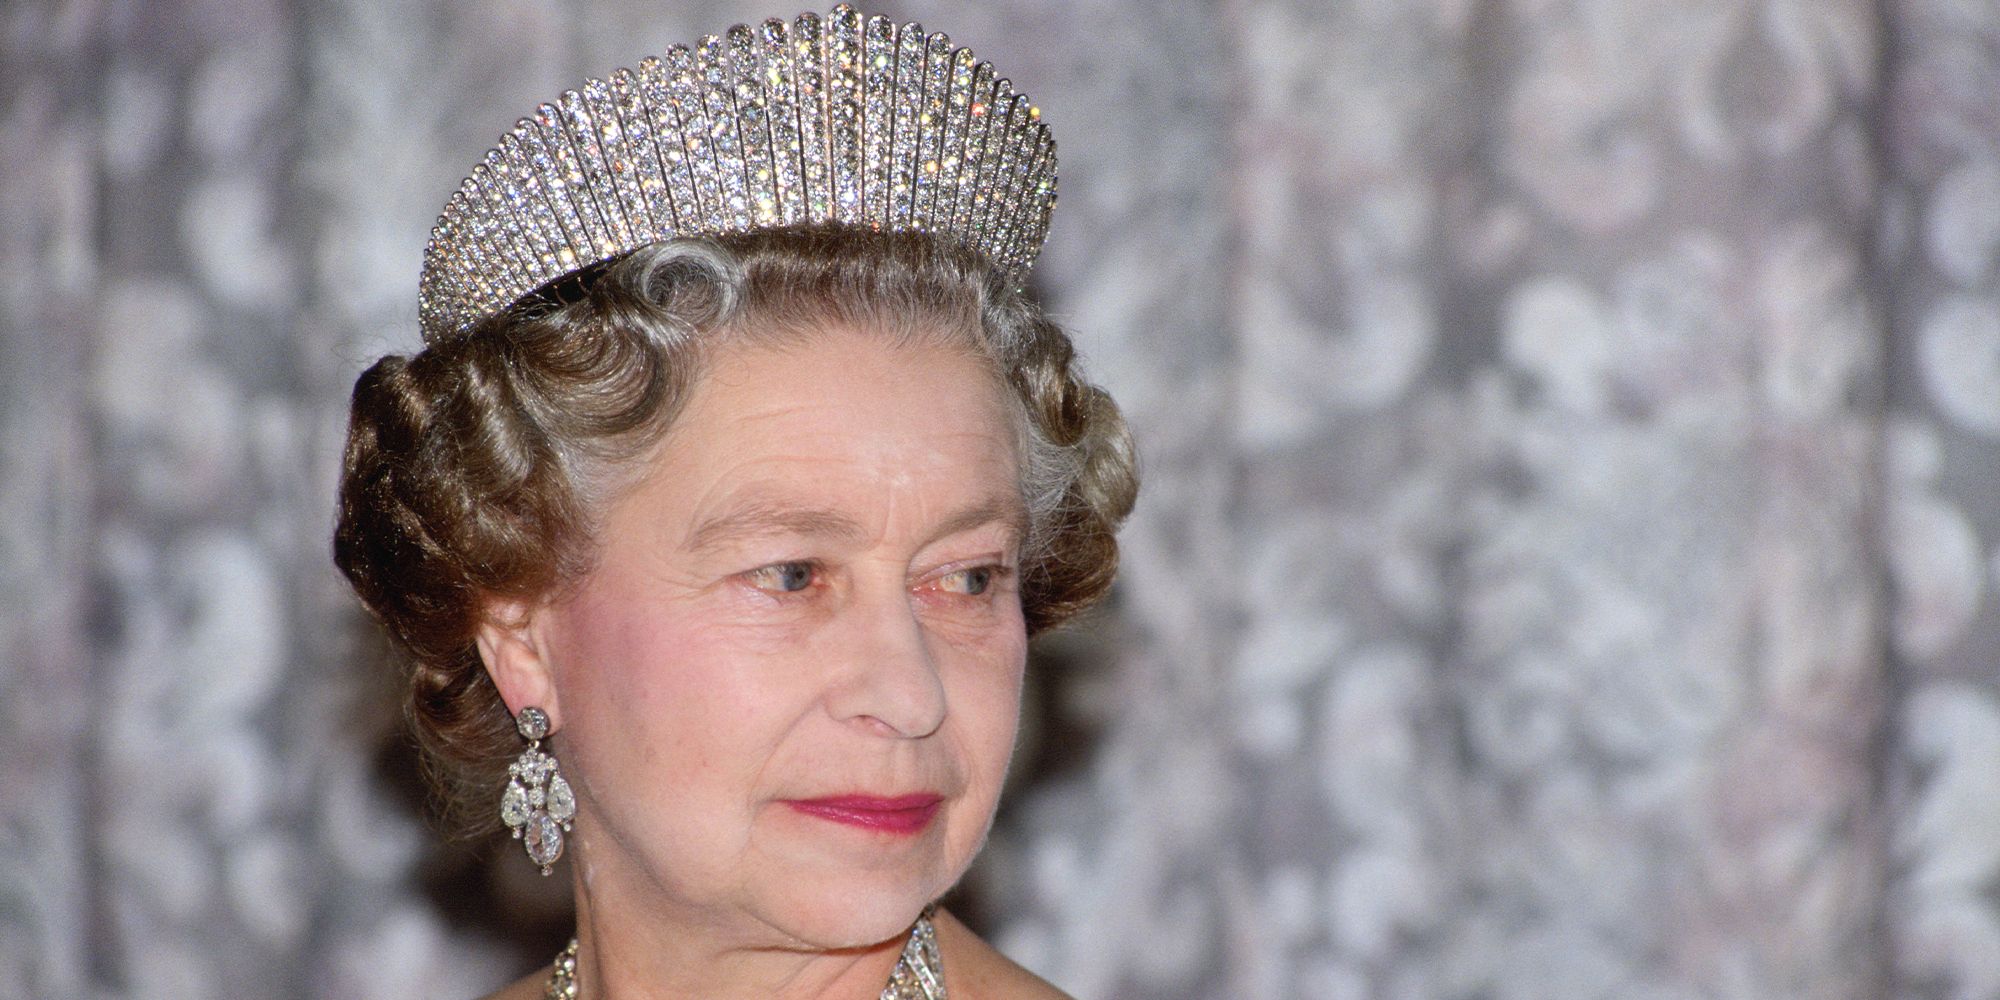 She Crowned Queens Of Cock Videos - The Queen's most meaningful jewellery